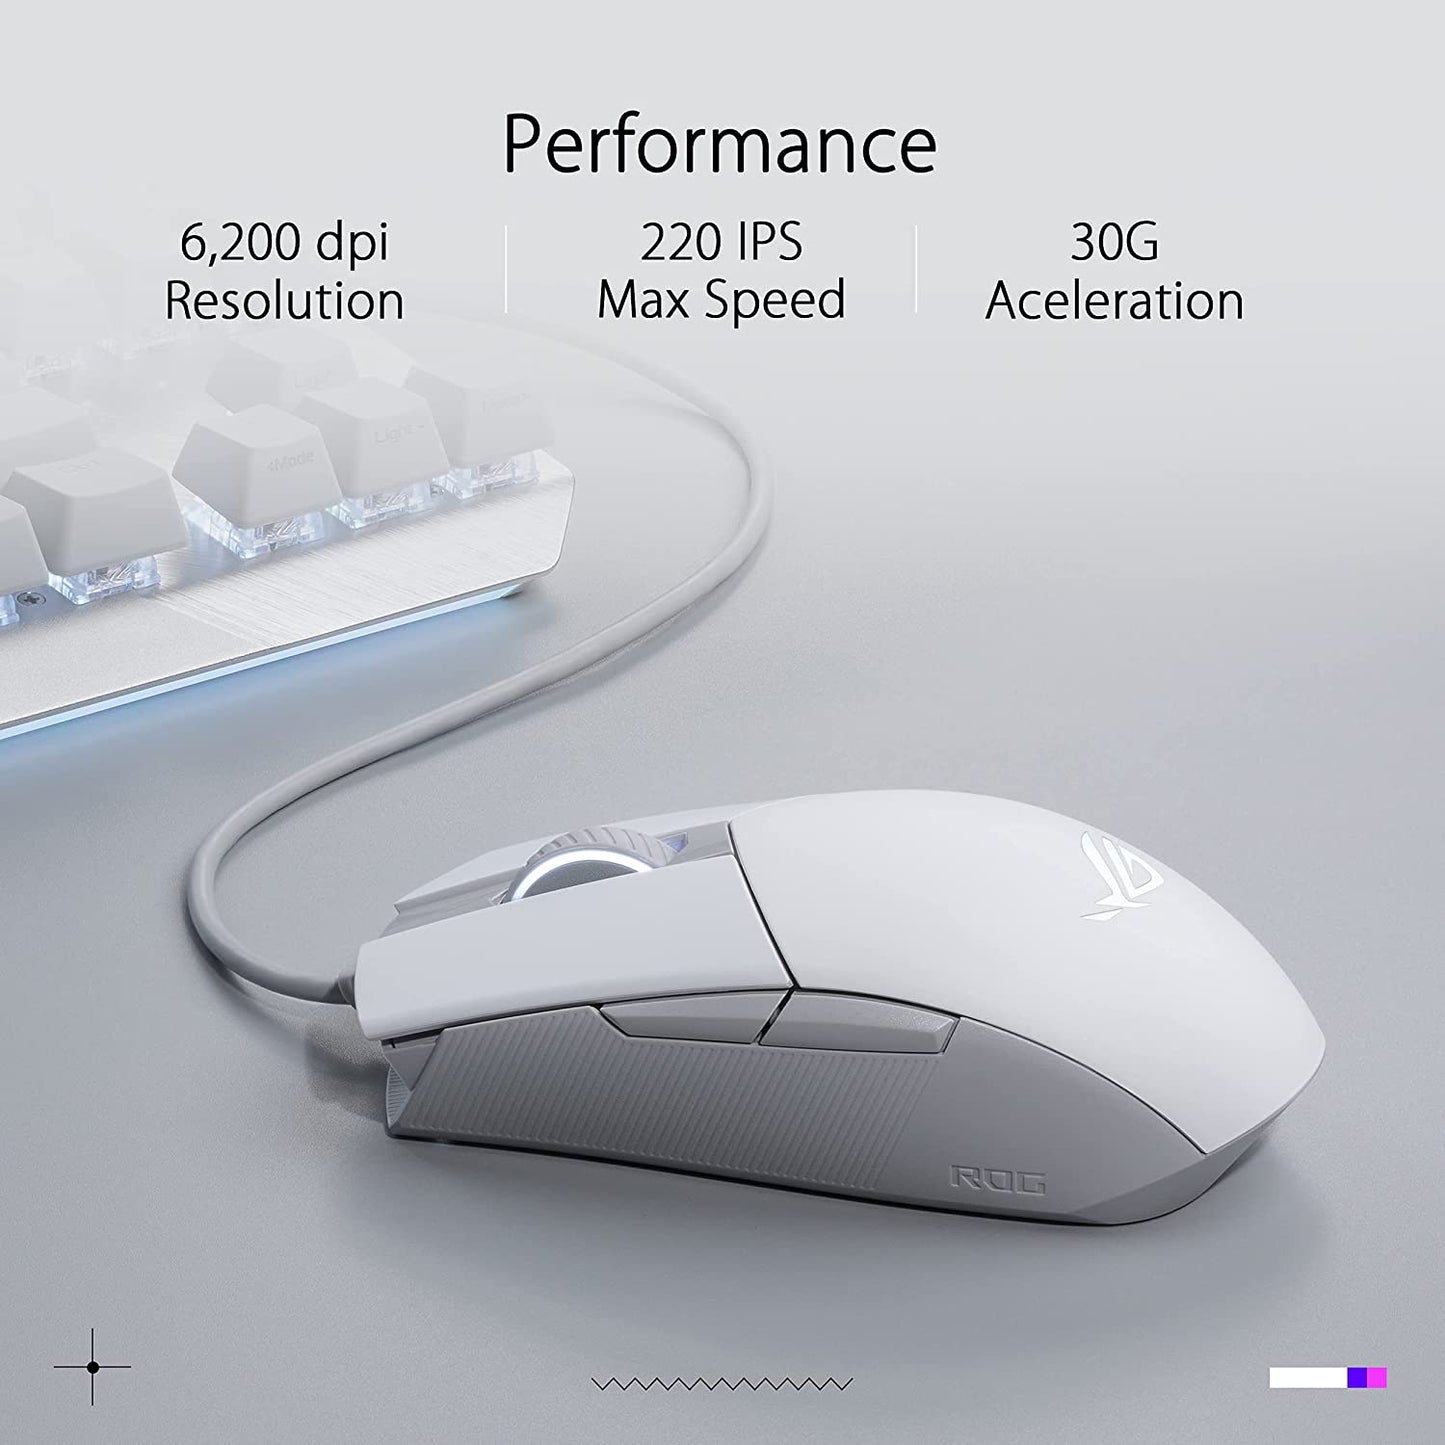 ASUS ROG Strix Impact II Moonlight White Gaming Mouse | Ambidextrous and Lightweight Design, 6200 DPI Optical Sensor, Push-Fit Hot Swappable Switches, Aura Sync RGB Lighting, Minimal Design Strix Impact II (Wired) Moonlight